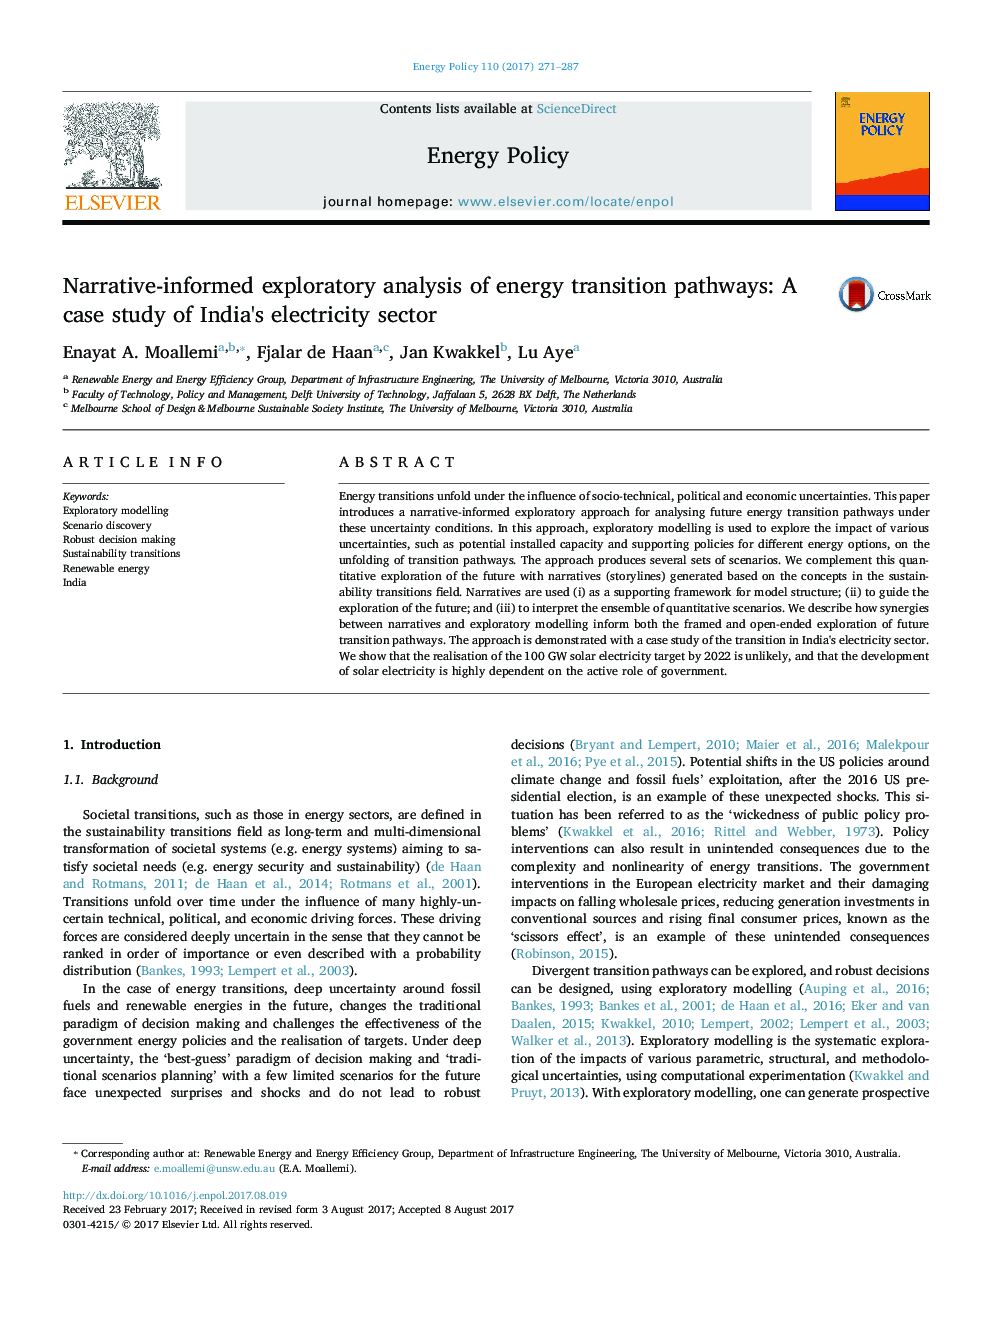 Narrative-informed exploratory analysis of energy transition pathways: A case study of India's electricity sector